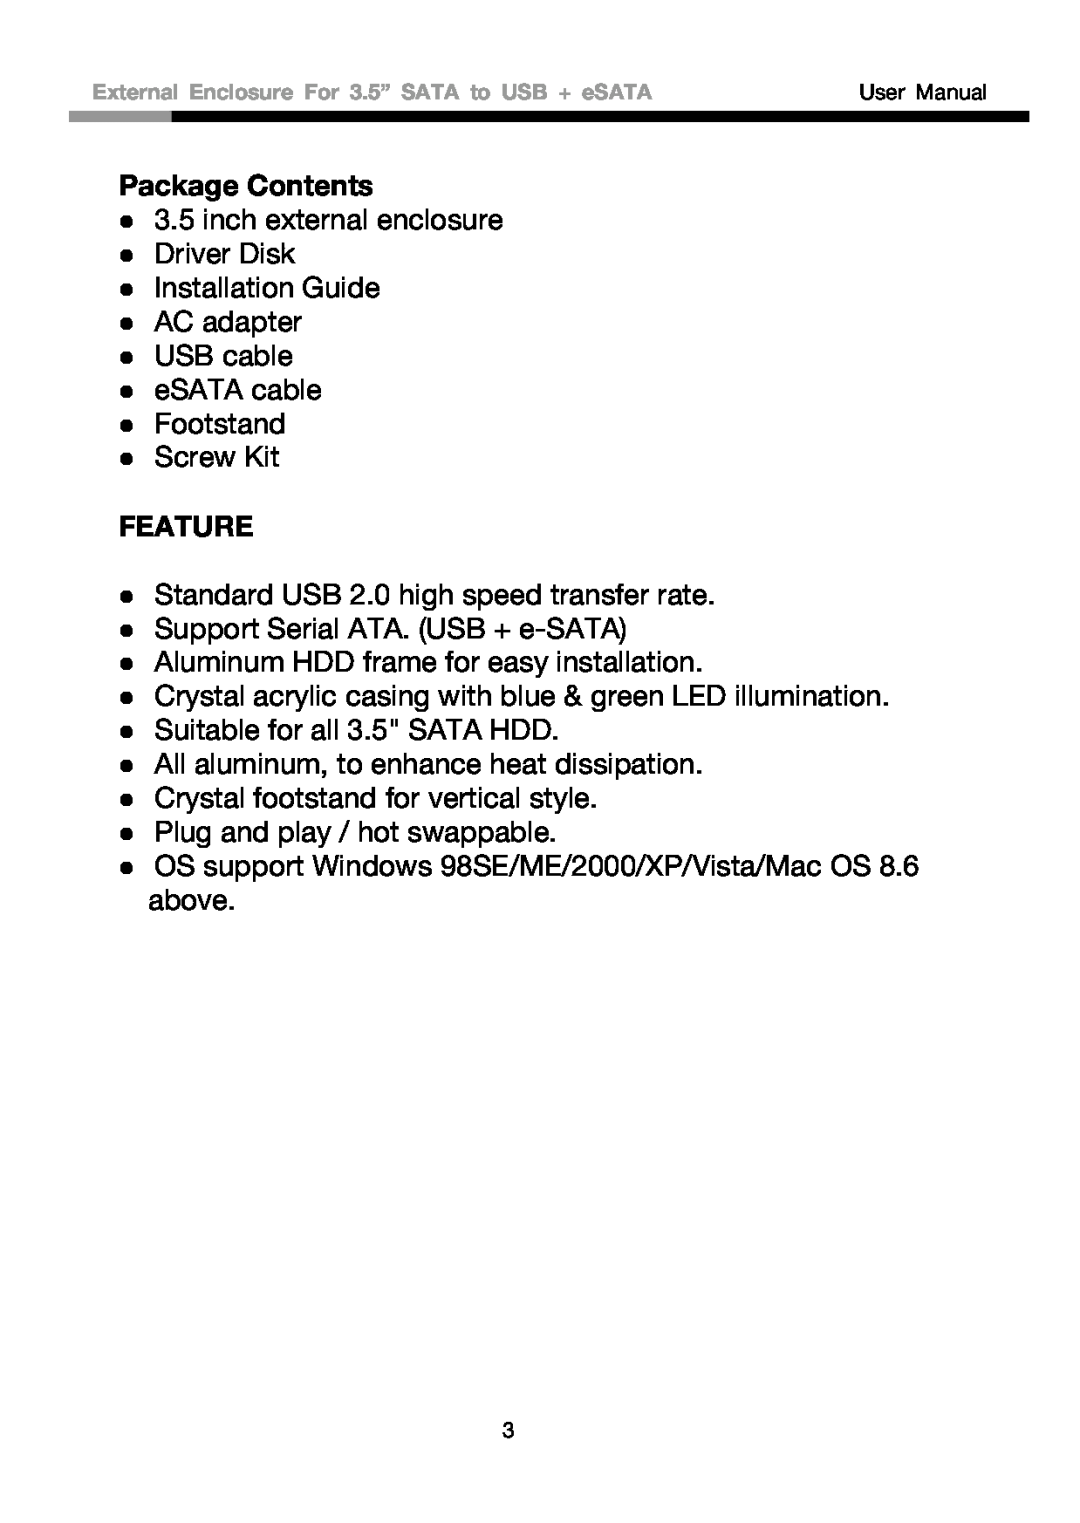 Rosewill RX81US-HT35B-BLK user manual Package Contents, Feature 